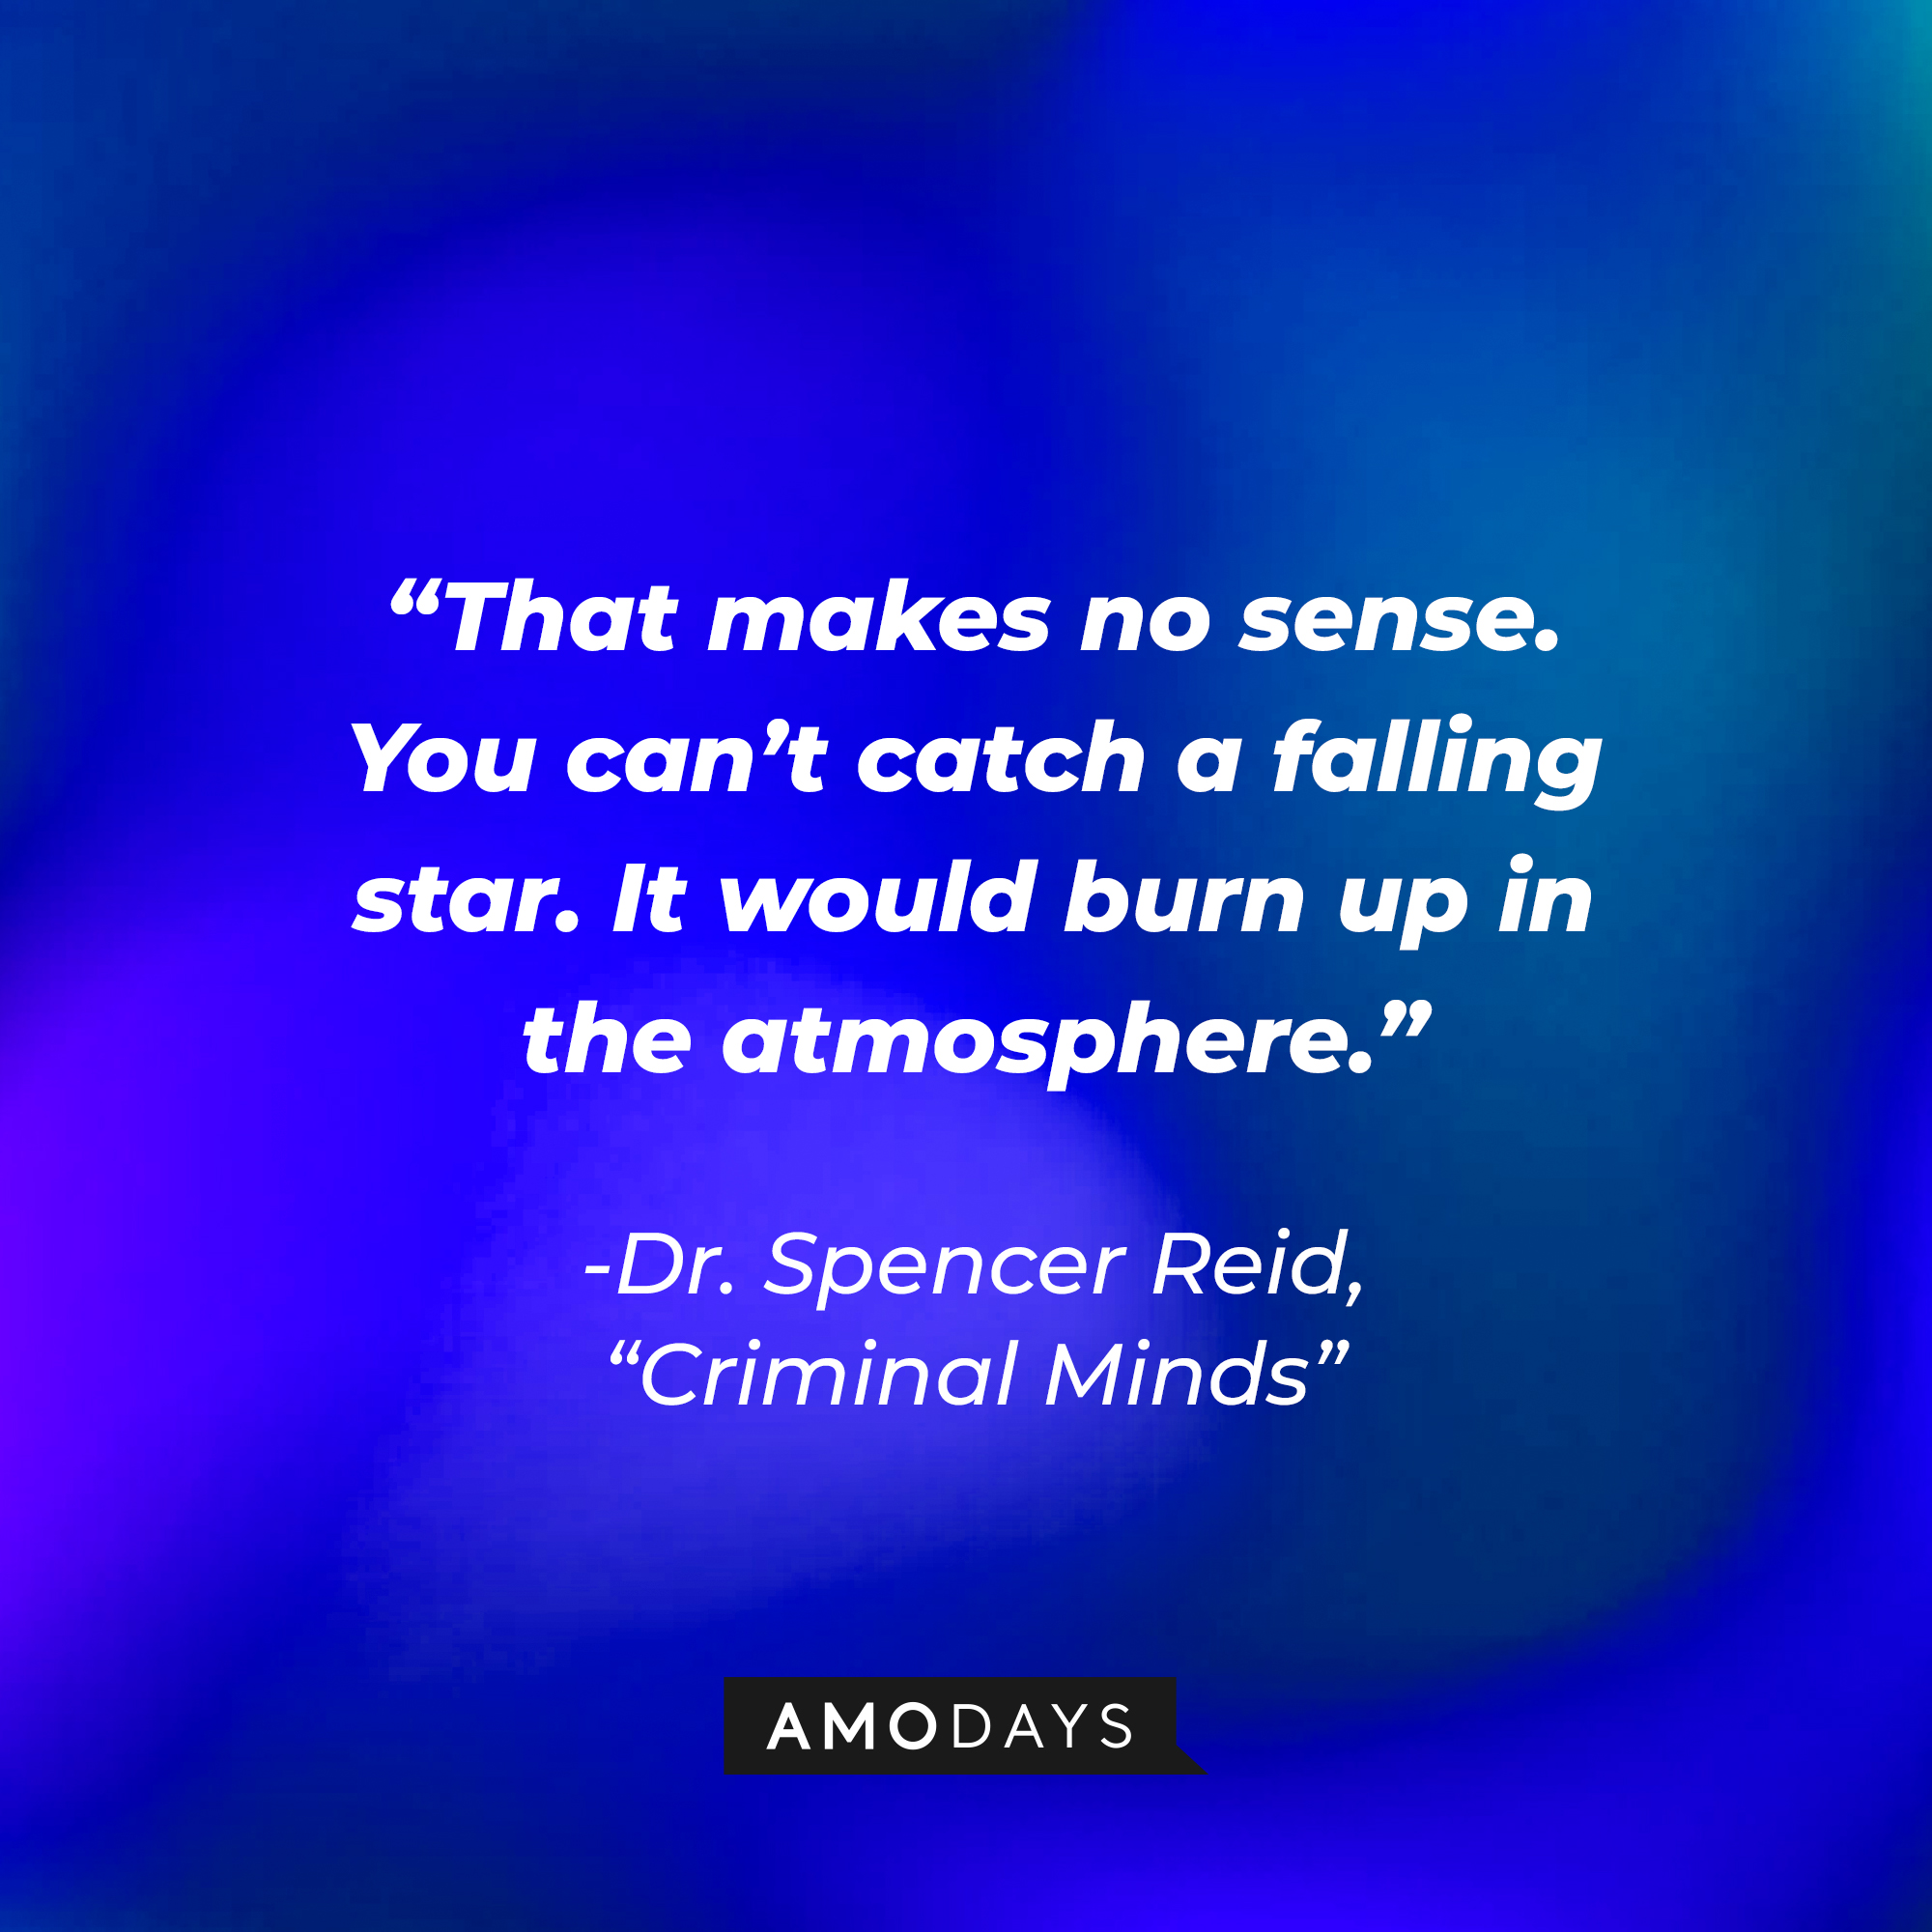 Dr. Spencer Reid's quote: “That makes no sense. You can’t catch a falling star. It would burn up in the atmosphere.” | Source: Amodays